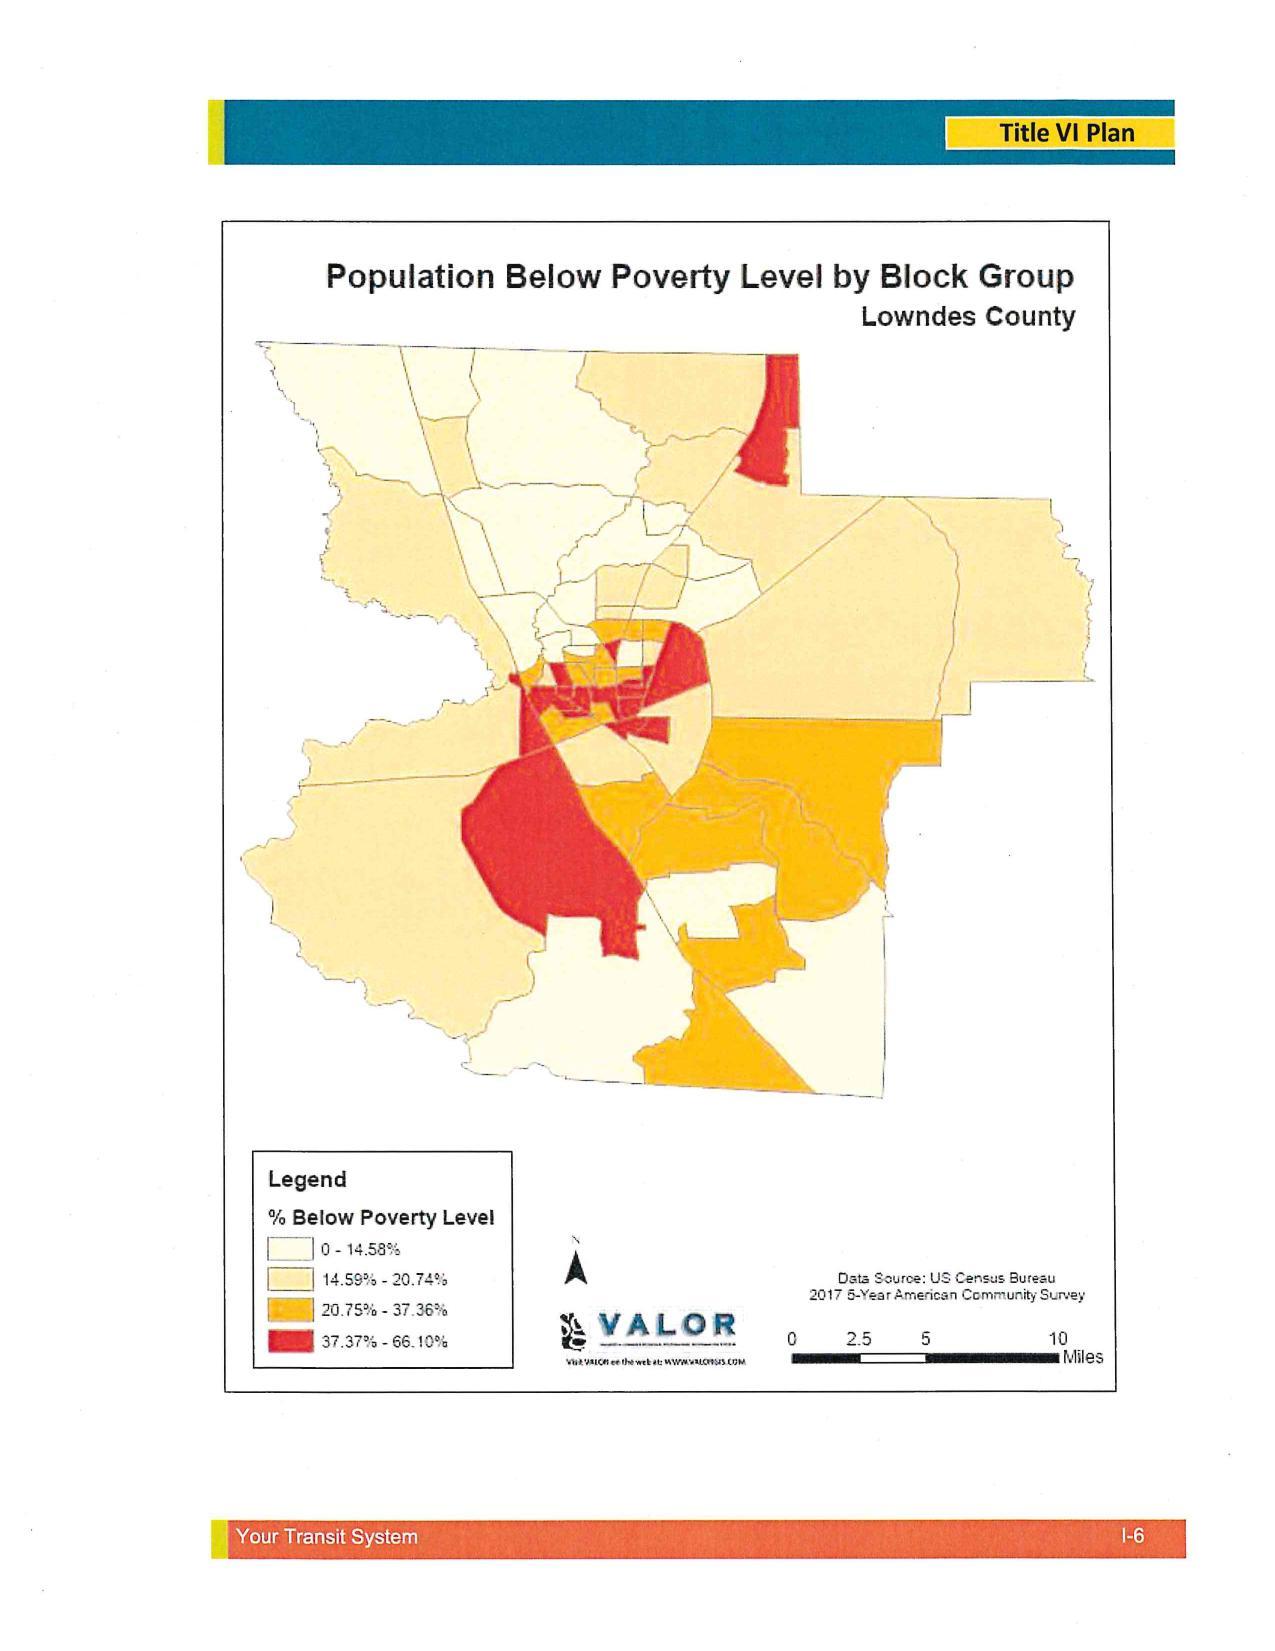 Population Below Poverty Level by Block Group